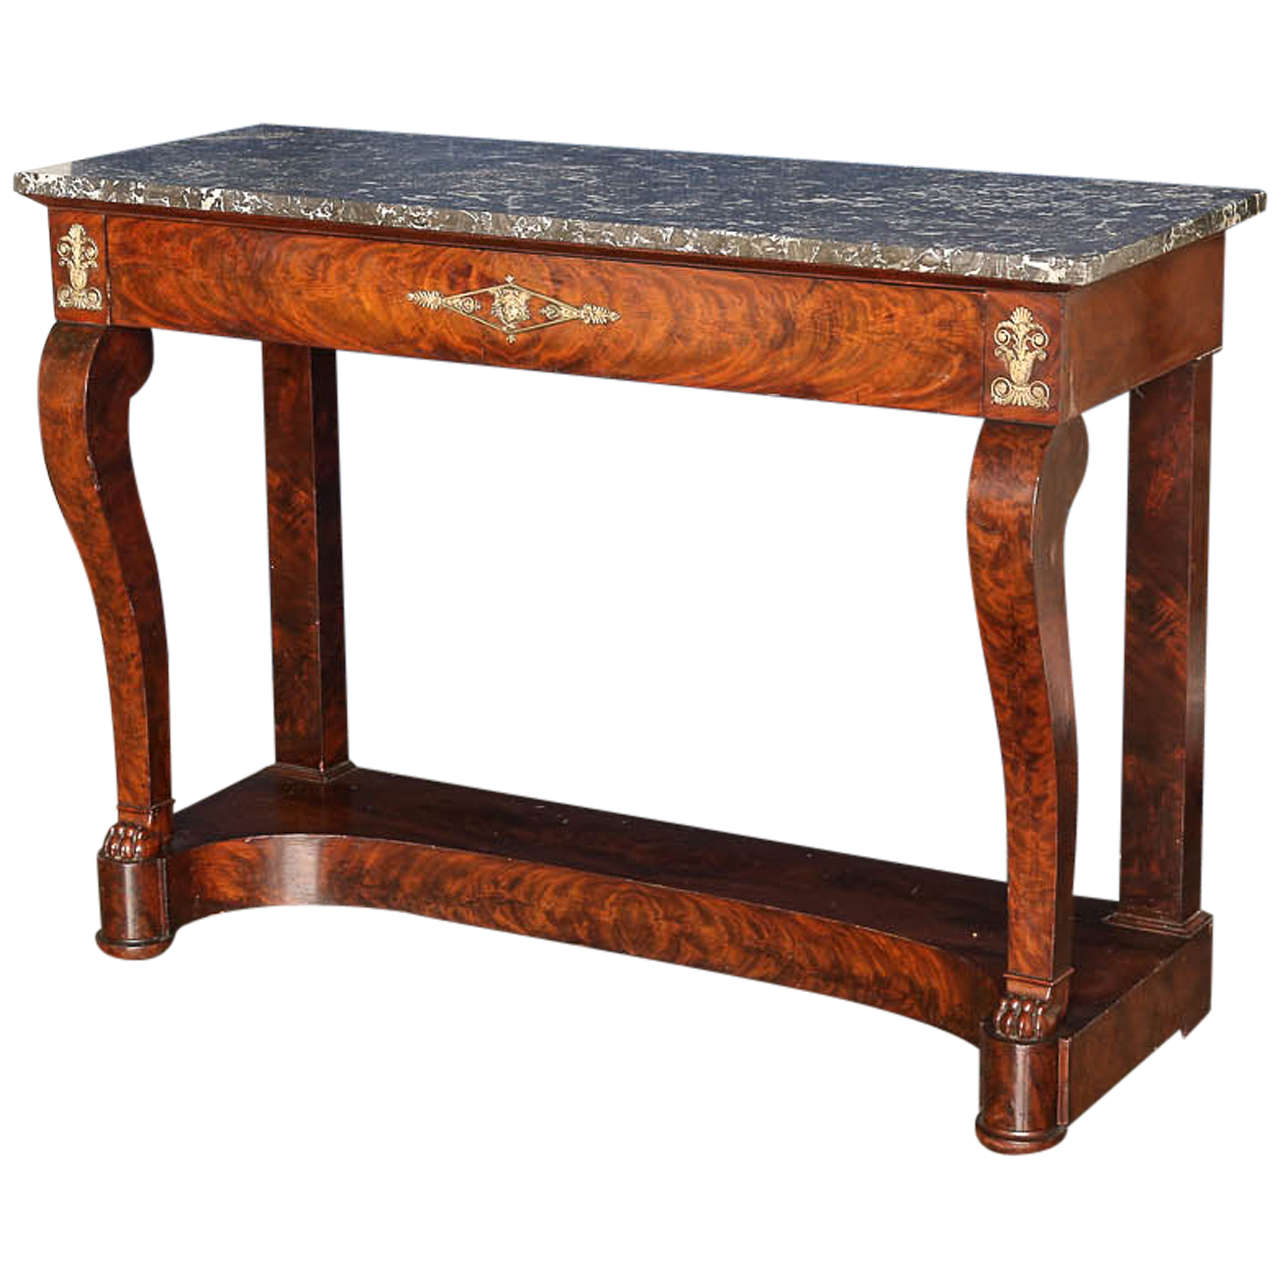 19th Century French Empire Style Console with Original Marble Top